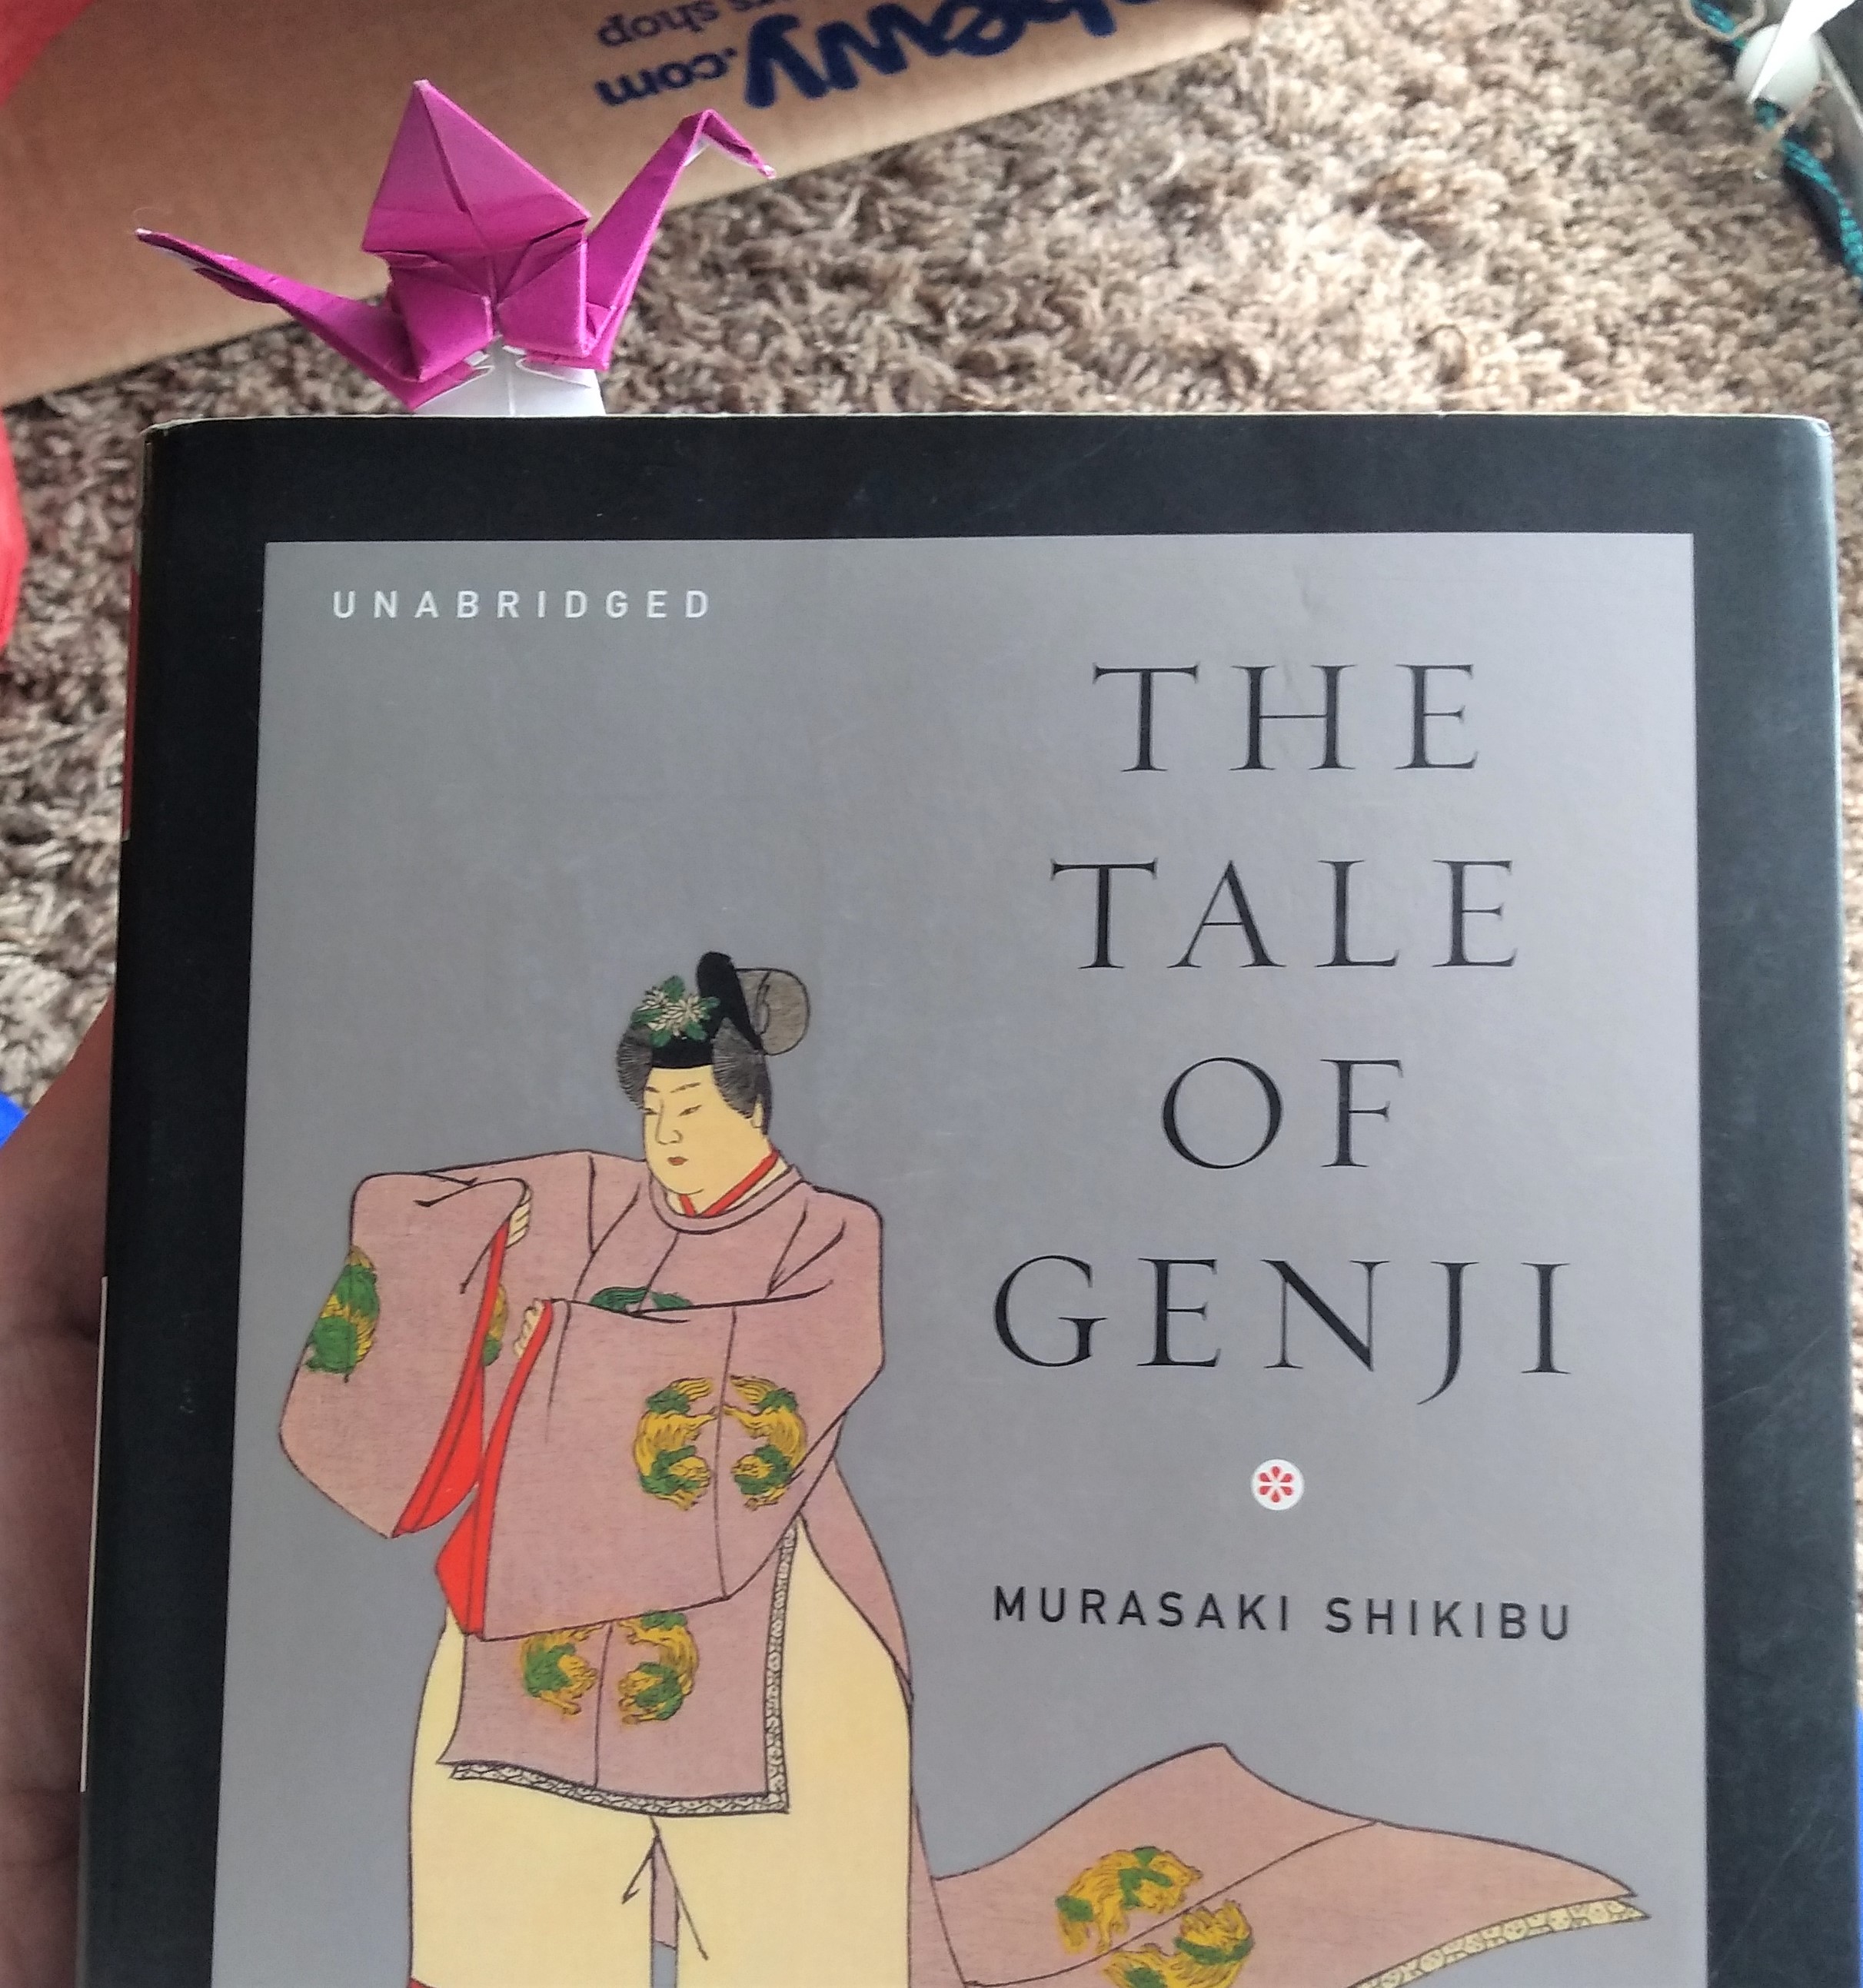 A pink origami crane bookmark inserted in The Tale of Genji.